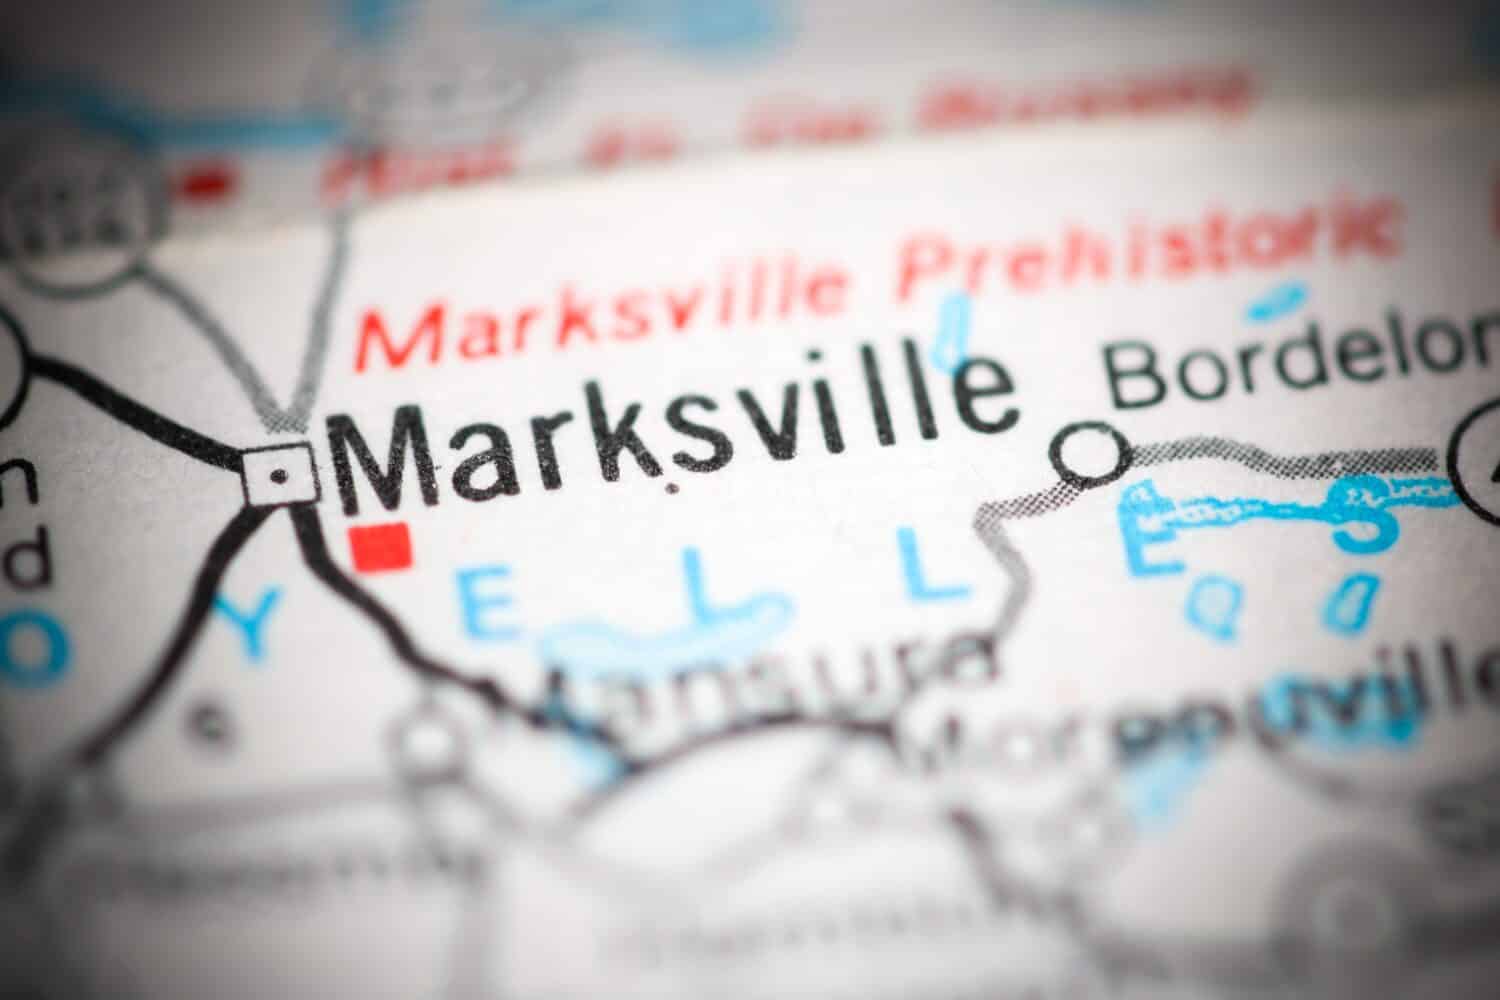 Marksville. Louisiana. USA on a geography map